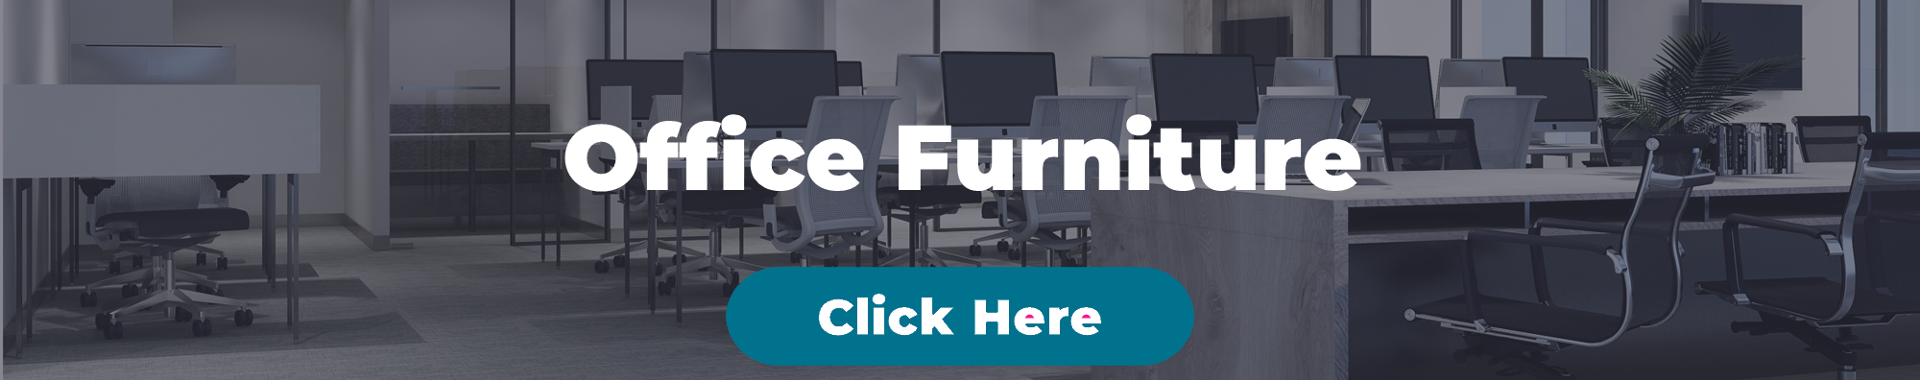 https://e7ut8we.cloudimg.io/v7/https://www.mourneofficesupplies.com/ws_content/slideshow/furniture1.png?force_format=webp&func=crop&h=380&w=1920